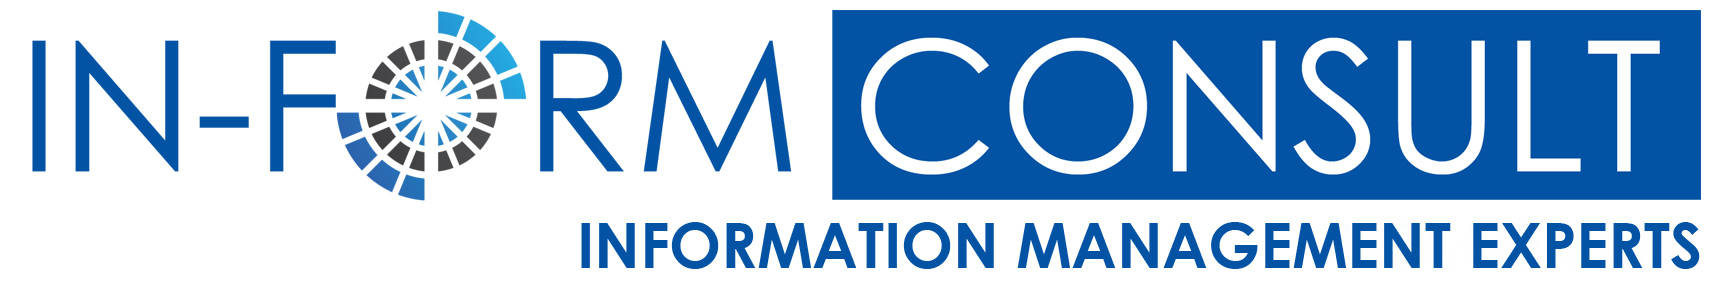 In-Form Consult Logo